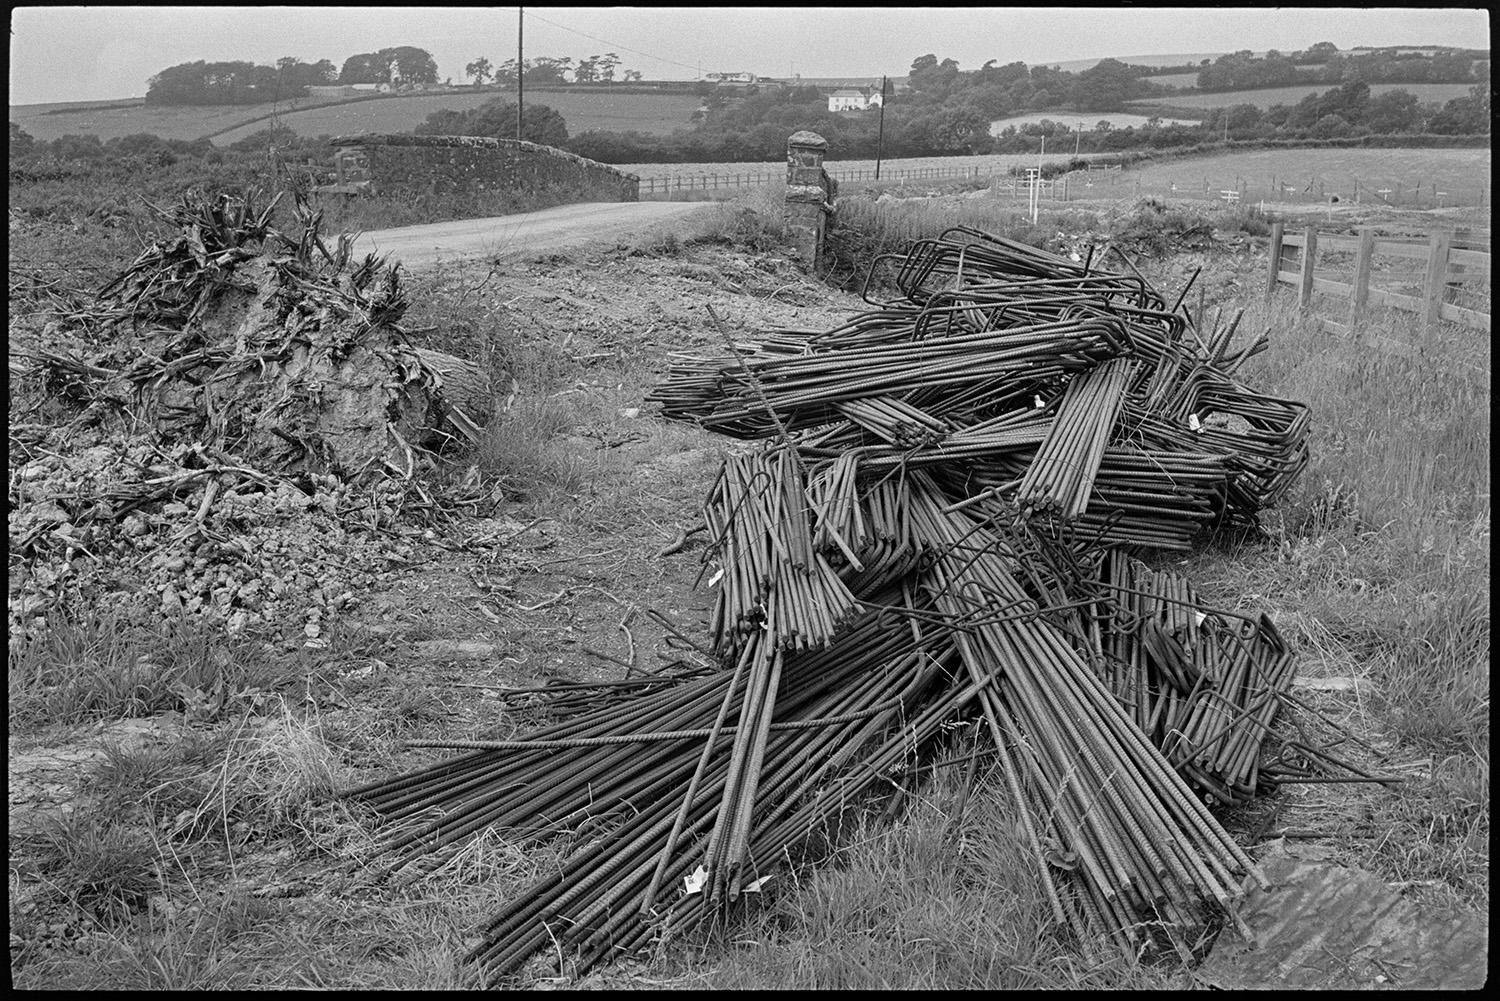 Surveying new link road, mechanical digger, piles of steel for reinforcement. <br />
[Steel rods for reinforcement piled on the roadside next to the site of the new Devon Link Road near South Molton. A stone bridge can be seen in the background.]